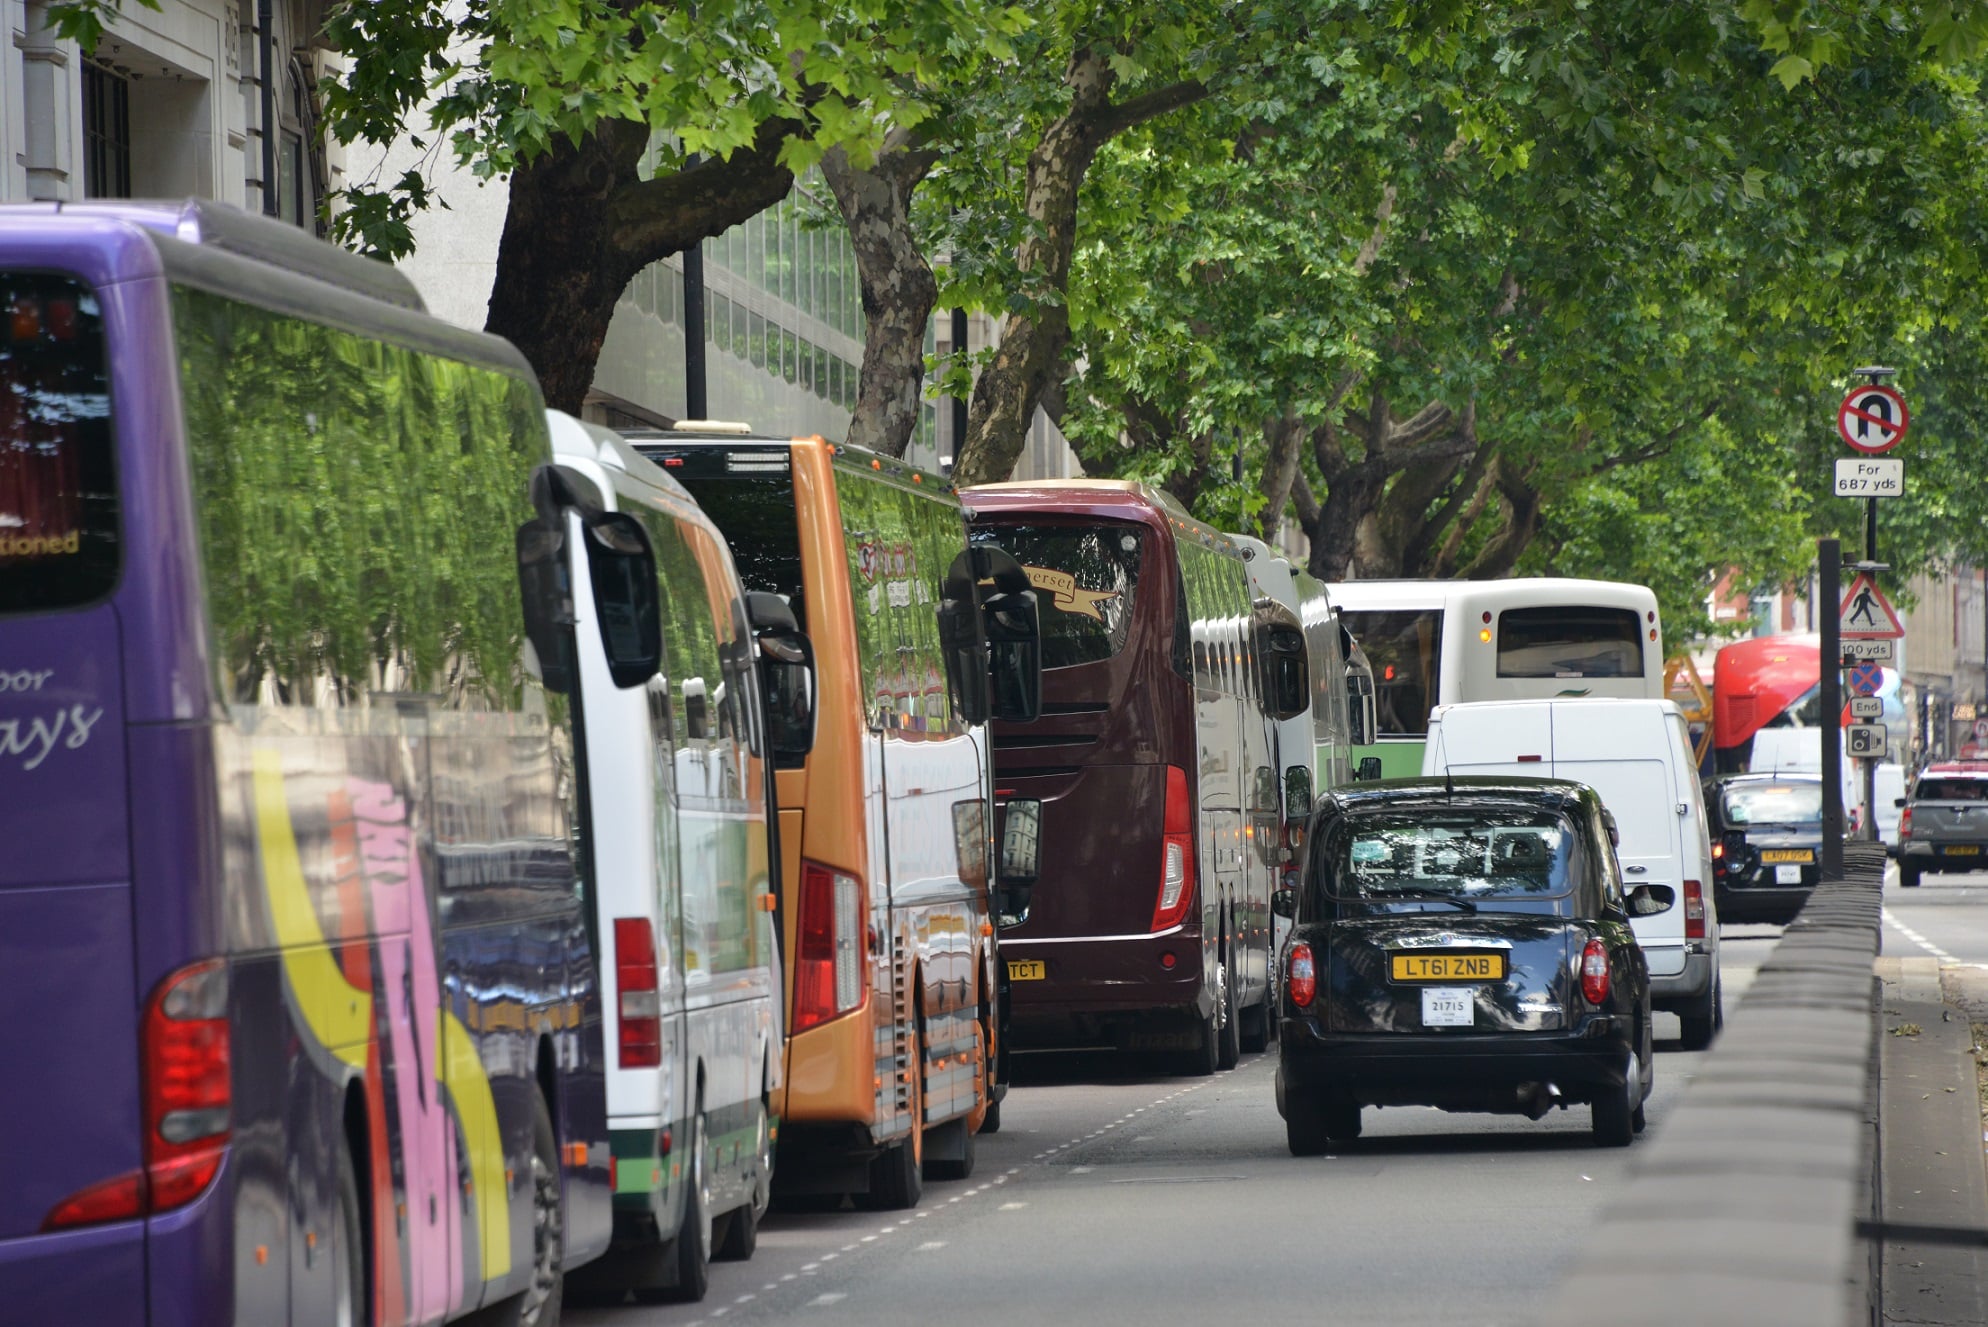 Coach parking in London during national mourning period being finalised